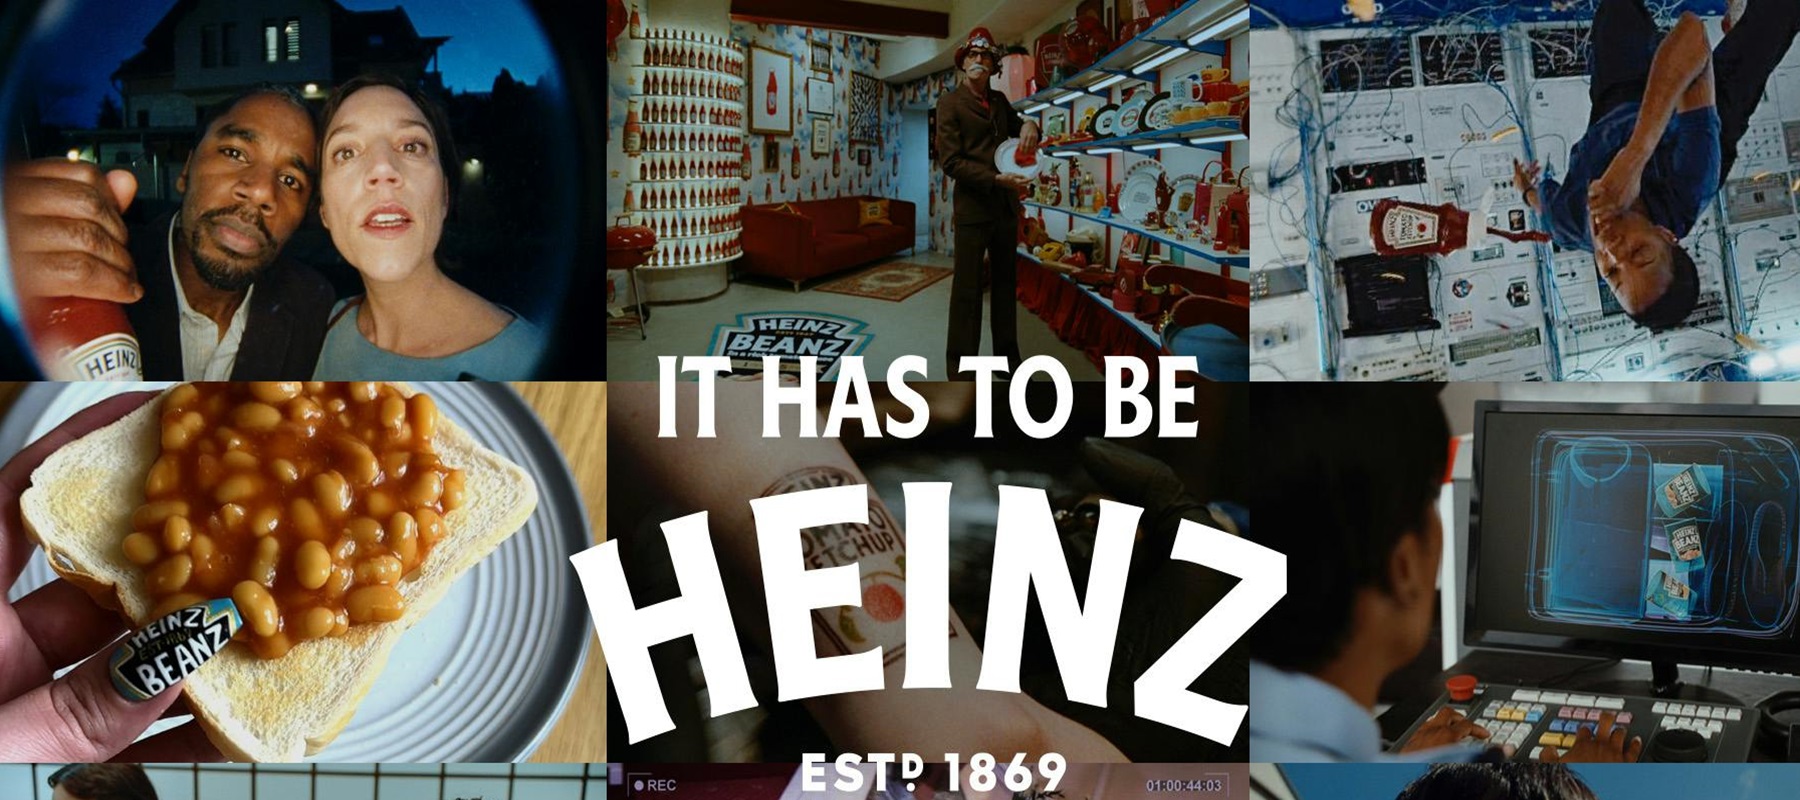 Klick Health, Heinz Ketchup and KPN campaigns win Grand Prix at Cannes Lions